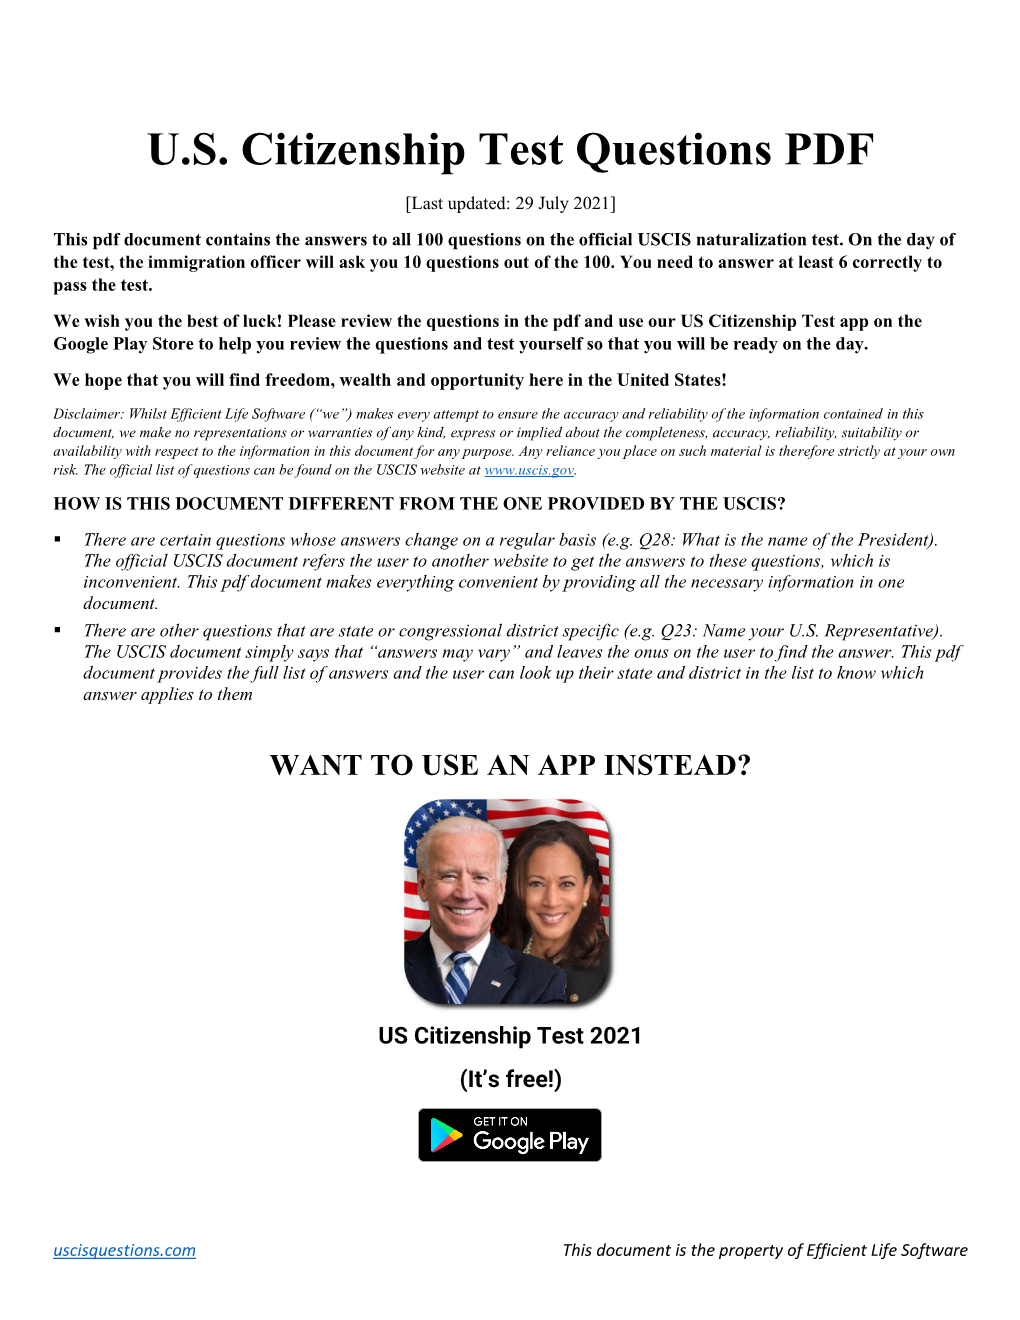 U.S. Citizenship Test Questions and Answers 2021